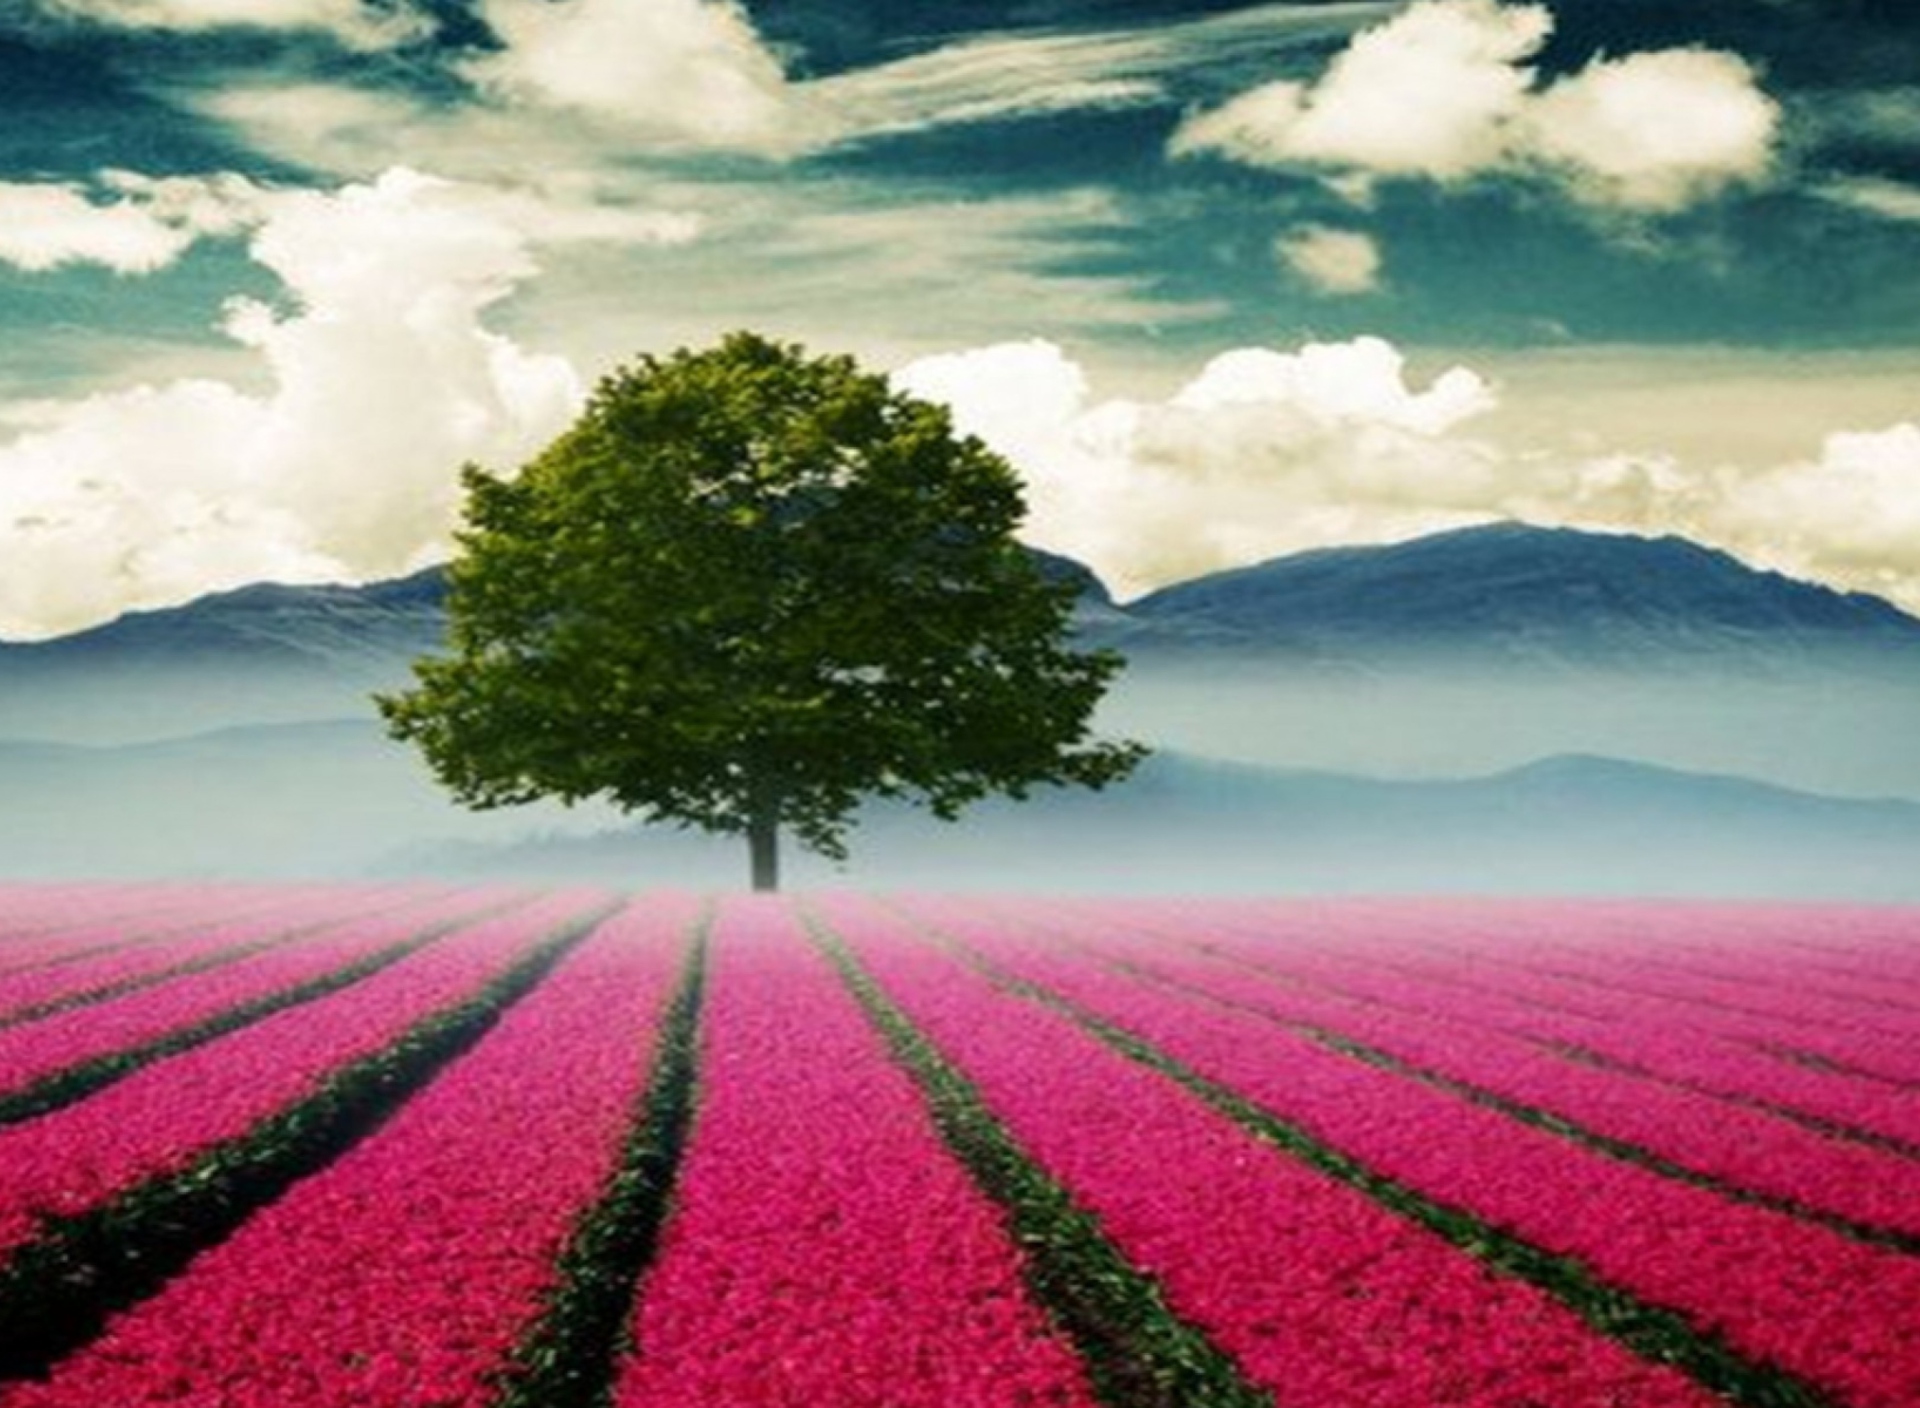 Beautiful Landscape With Tree And Pink Flower Field wallpaper 1920x1408